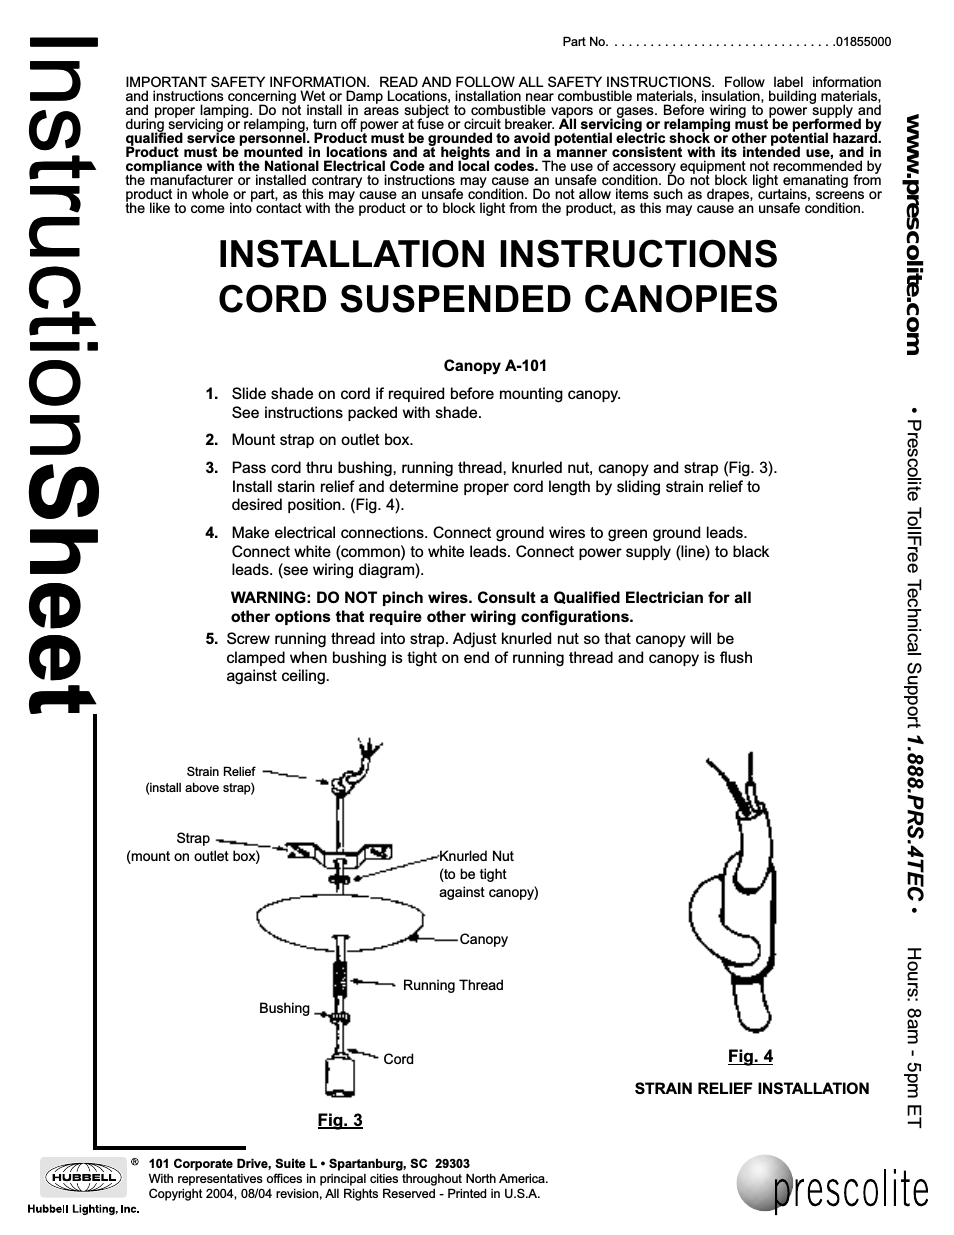 CORD SUSPENDED CANOPIES